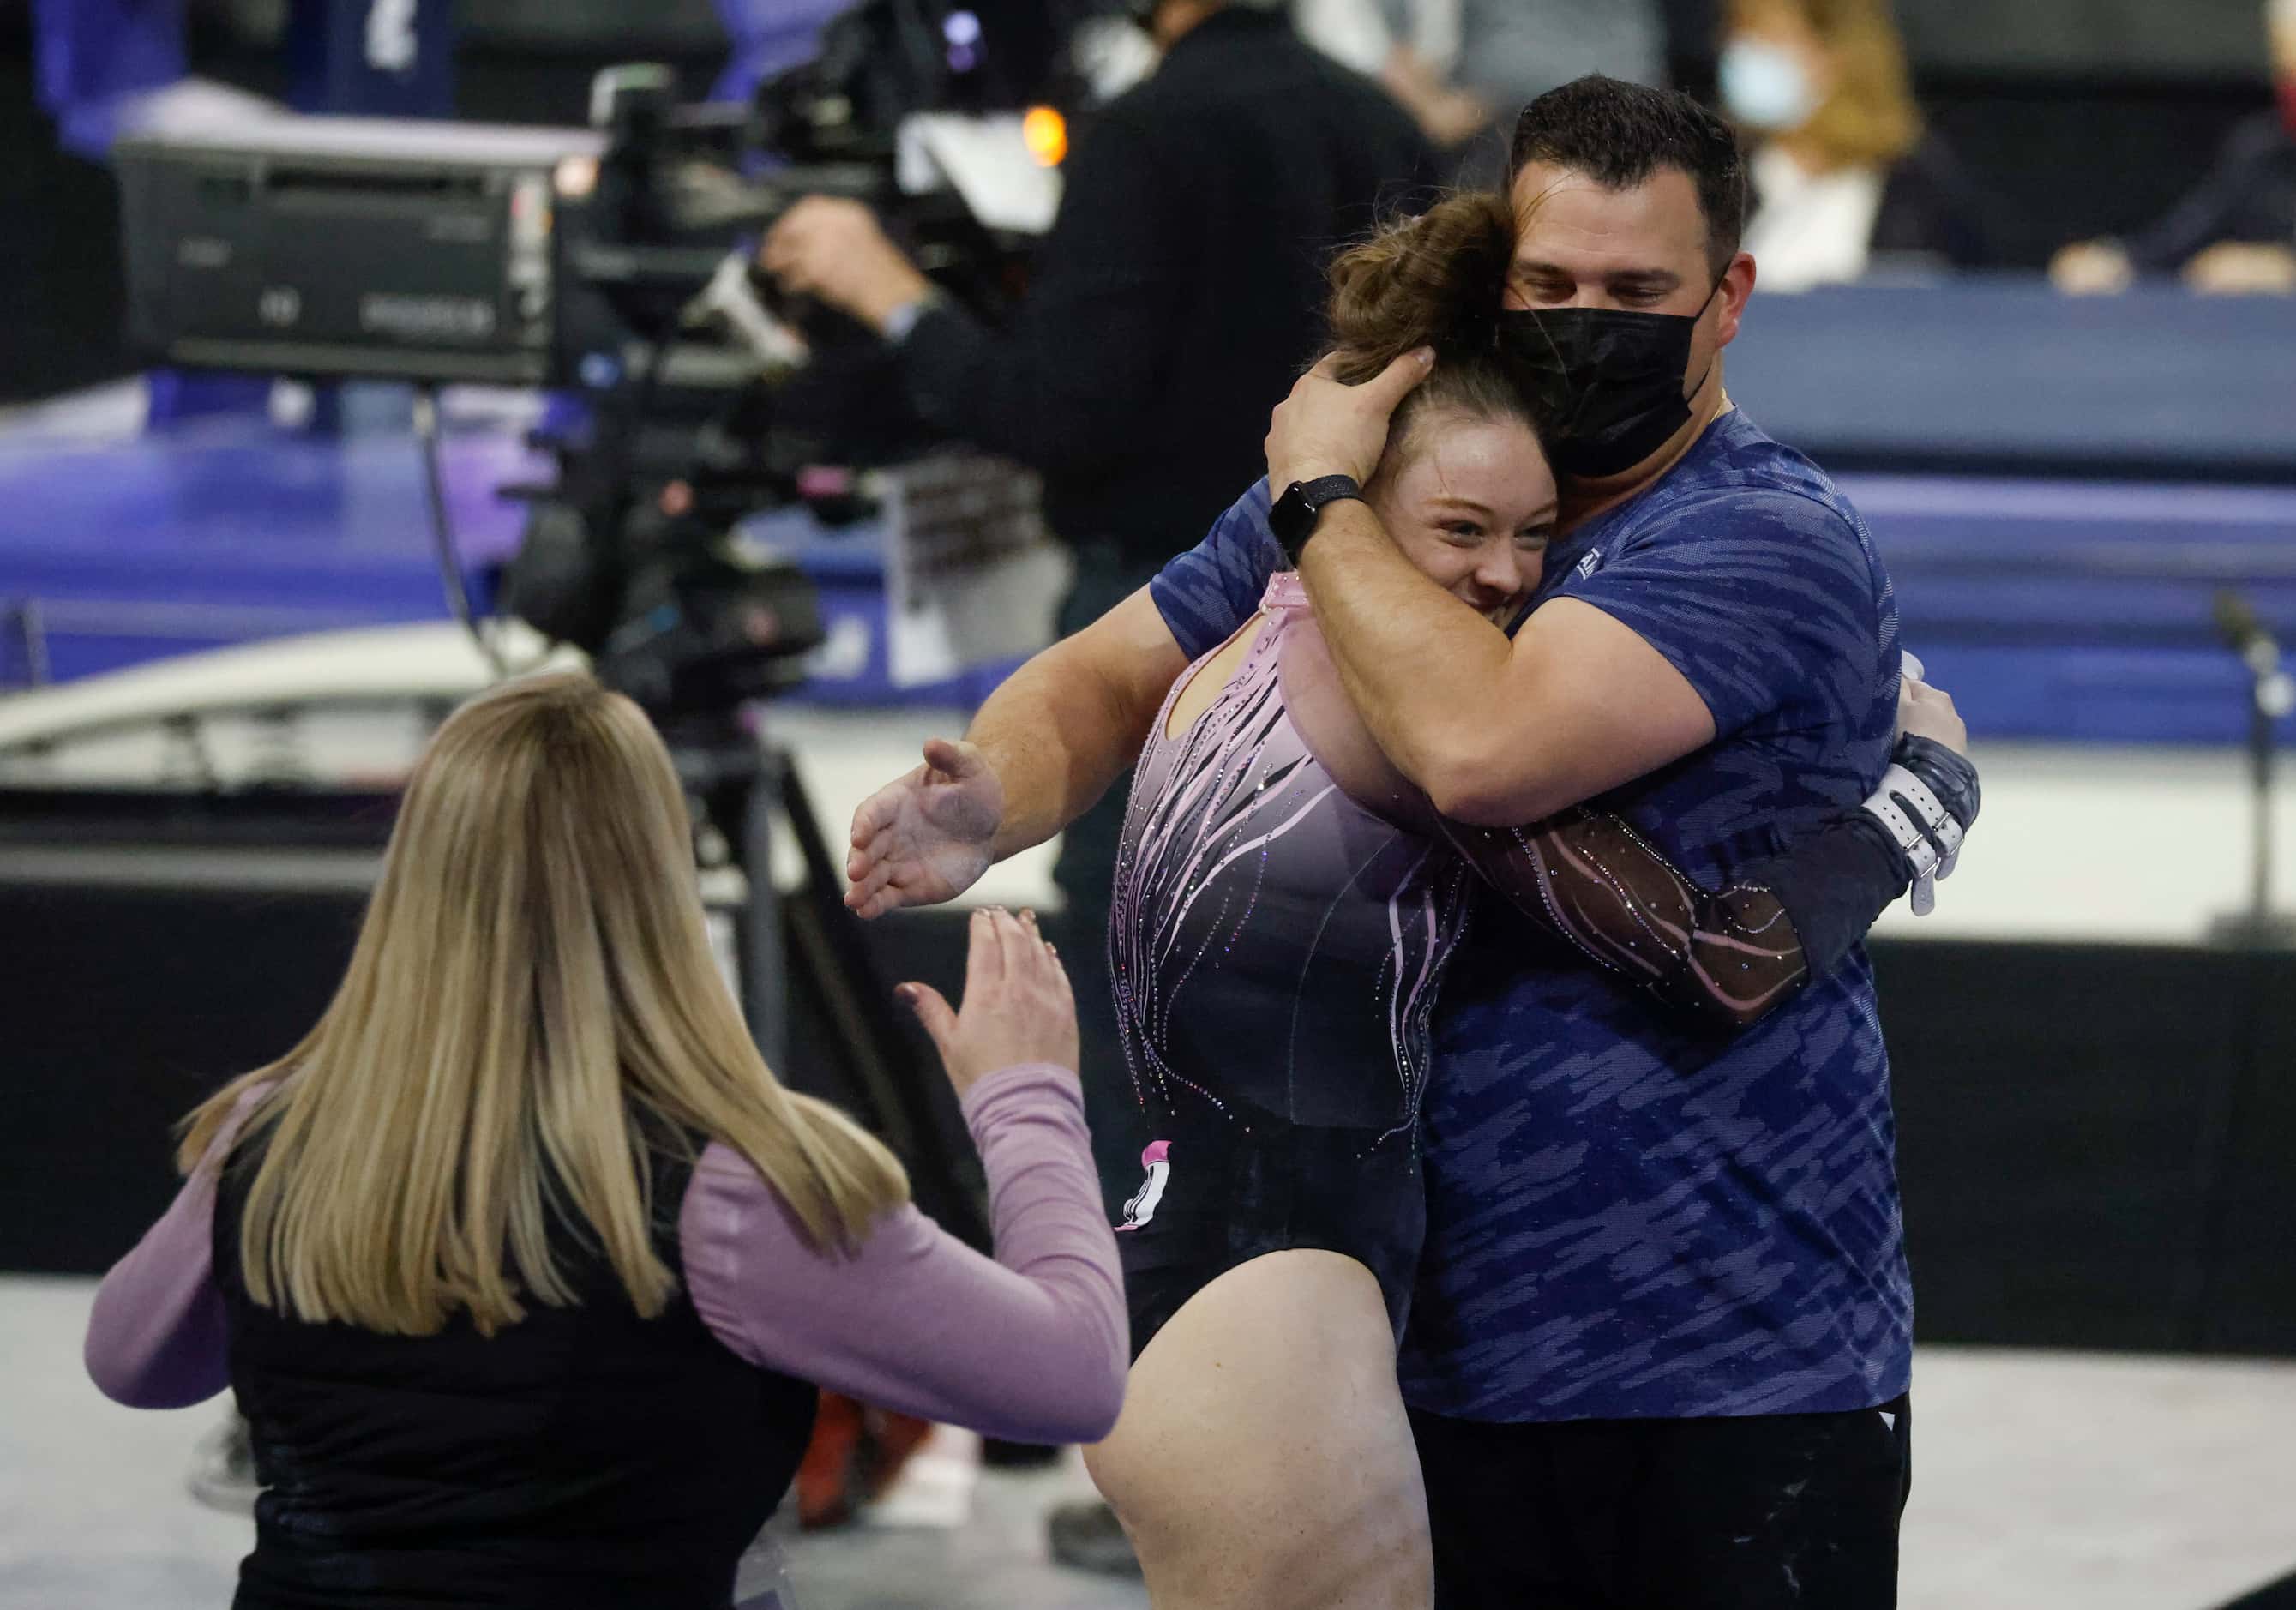 Abby Martin of Pearland Elite, Bacliff, Texas gets hugged by a gym official after...